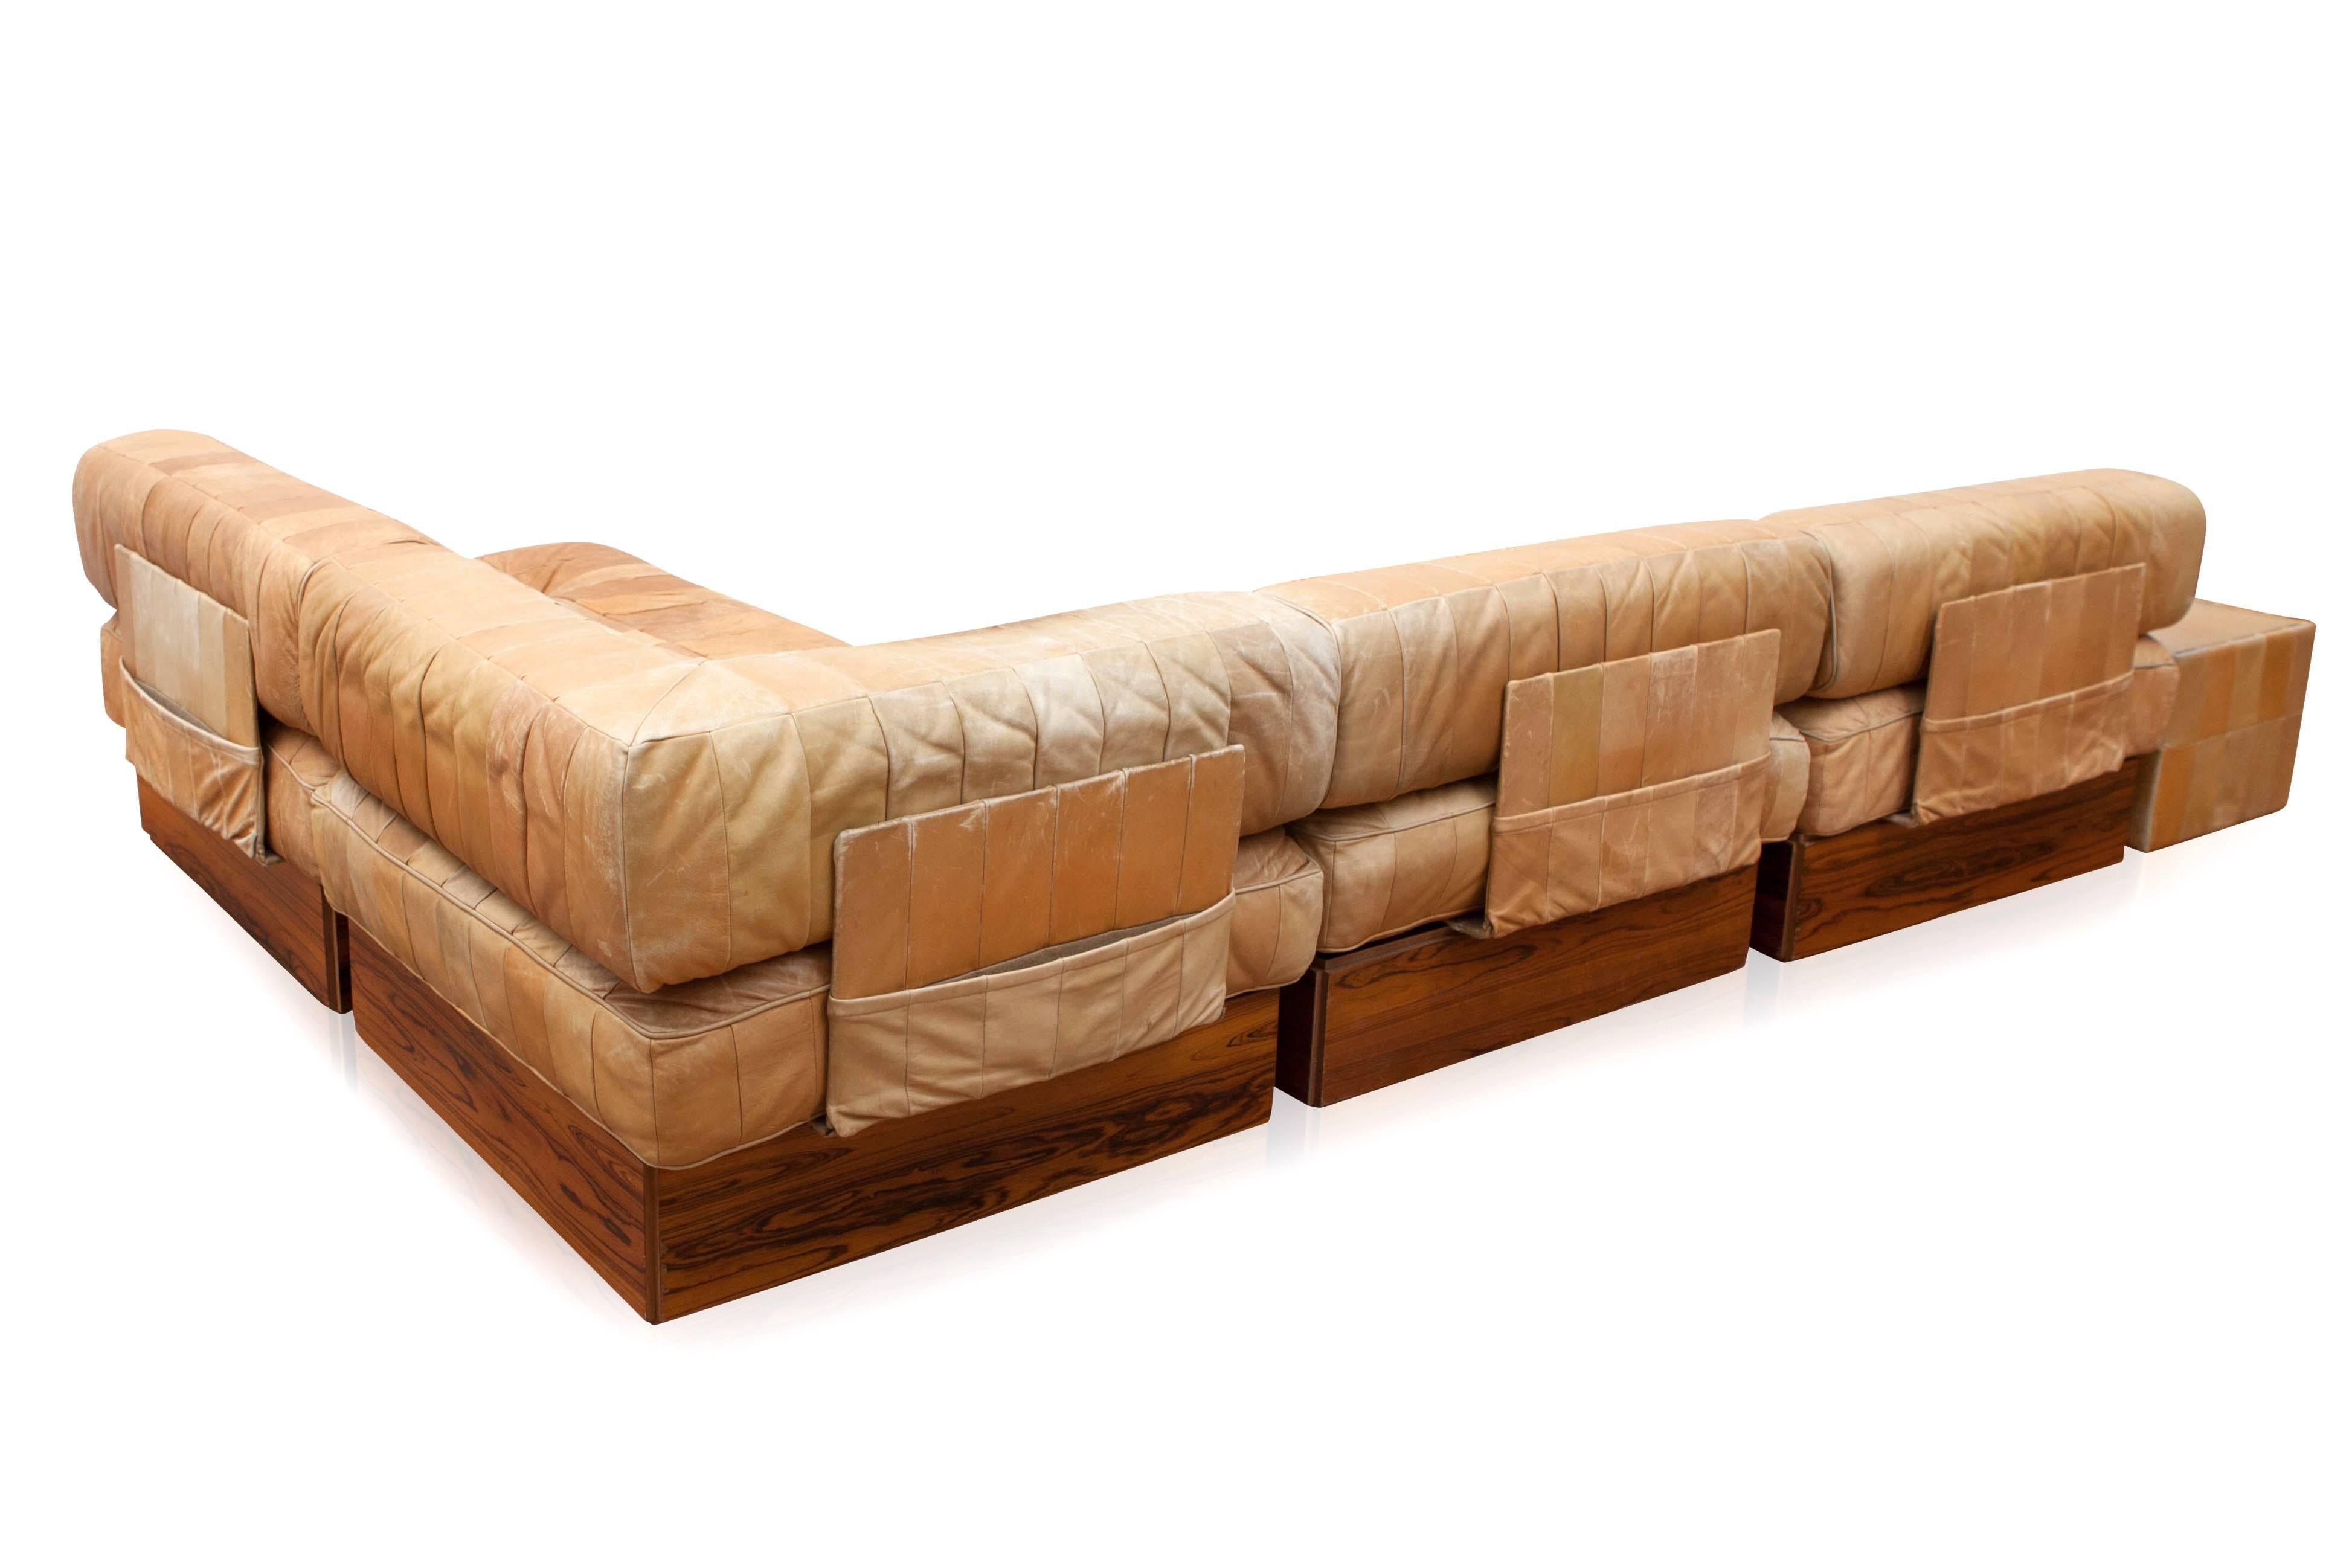 Sofa, DS 88, caramel brown patinated patchwork leather, 1970s.
This comfortable leather sectional sofa is manufactured 
by De Sede in Switzerland.

This sofa consists of 12 seating elements, four regular back cushions,
one double size back